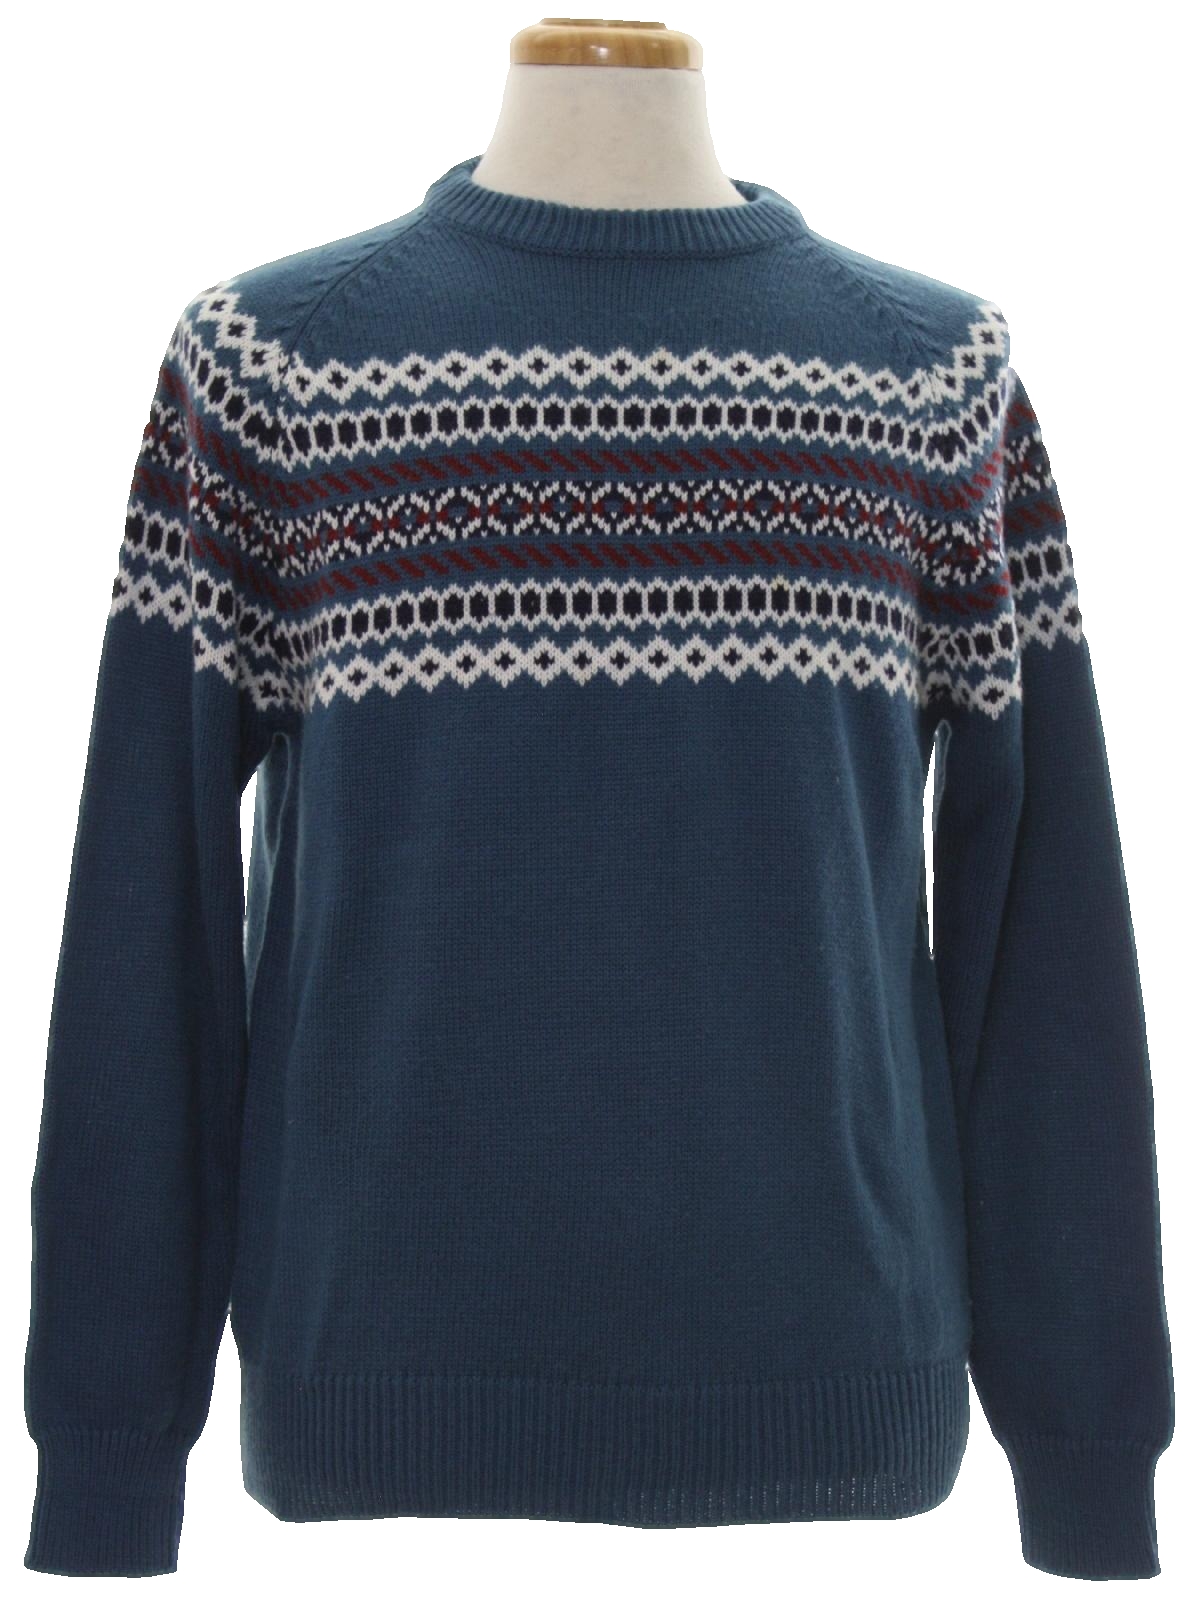 1970's Retro Sweater: 70s authentic vintage -Down Hill- Mens dusty blue ...